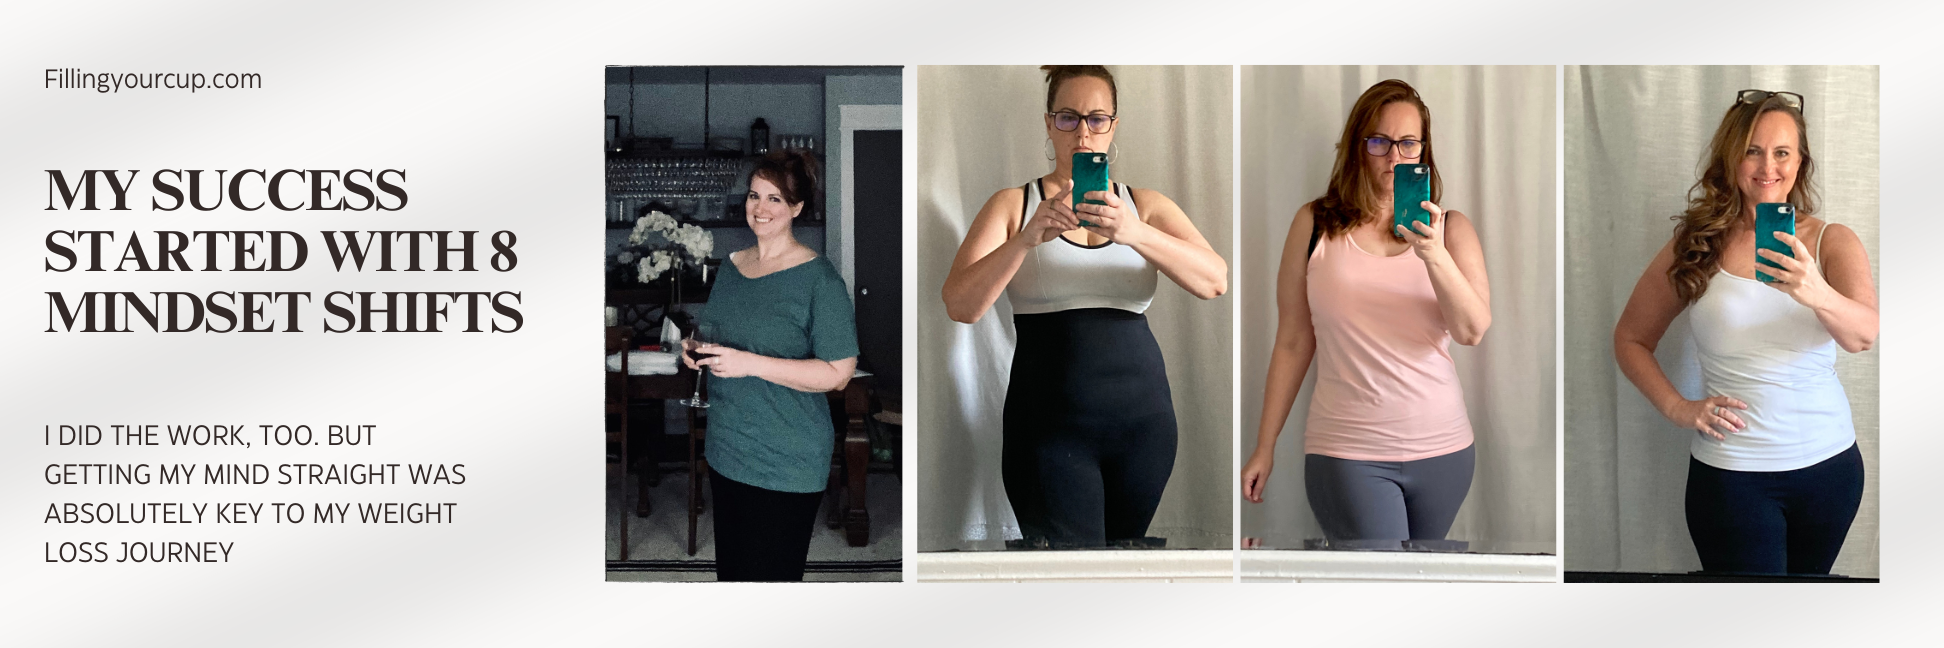 Mindset shifts that helped me lose 40 pounds